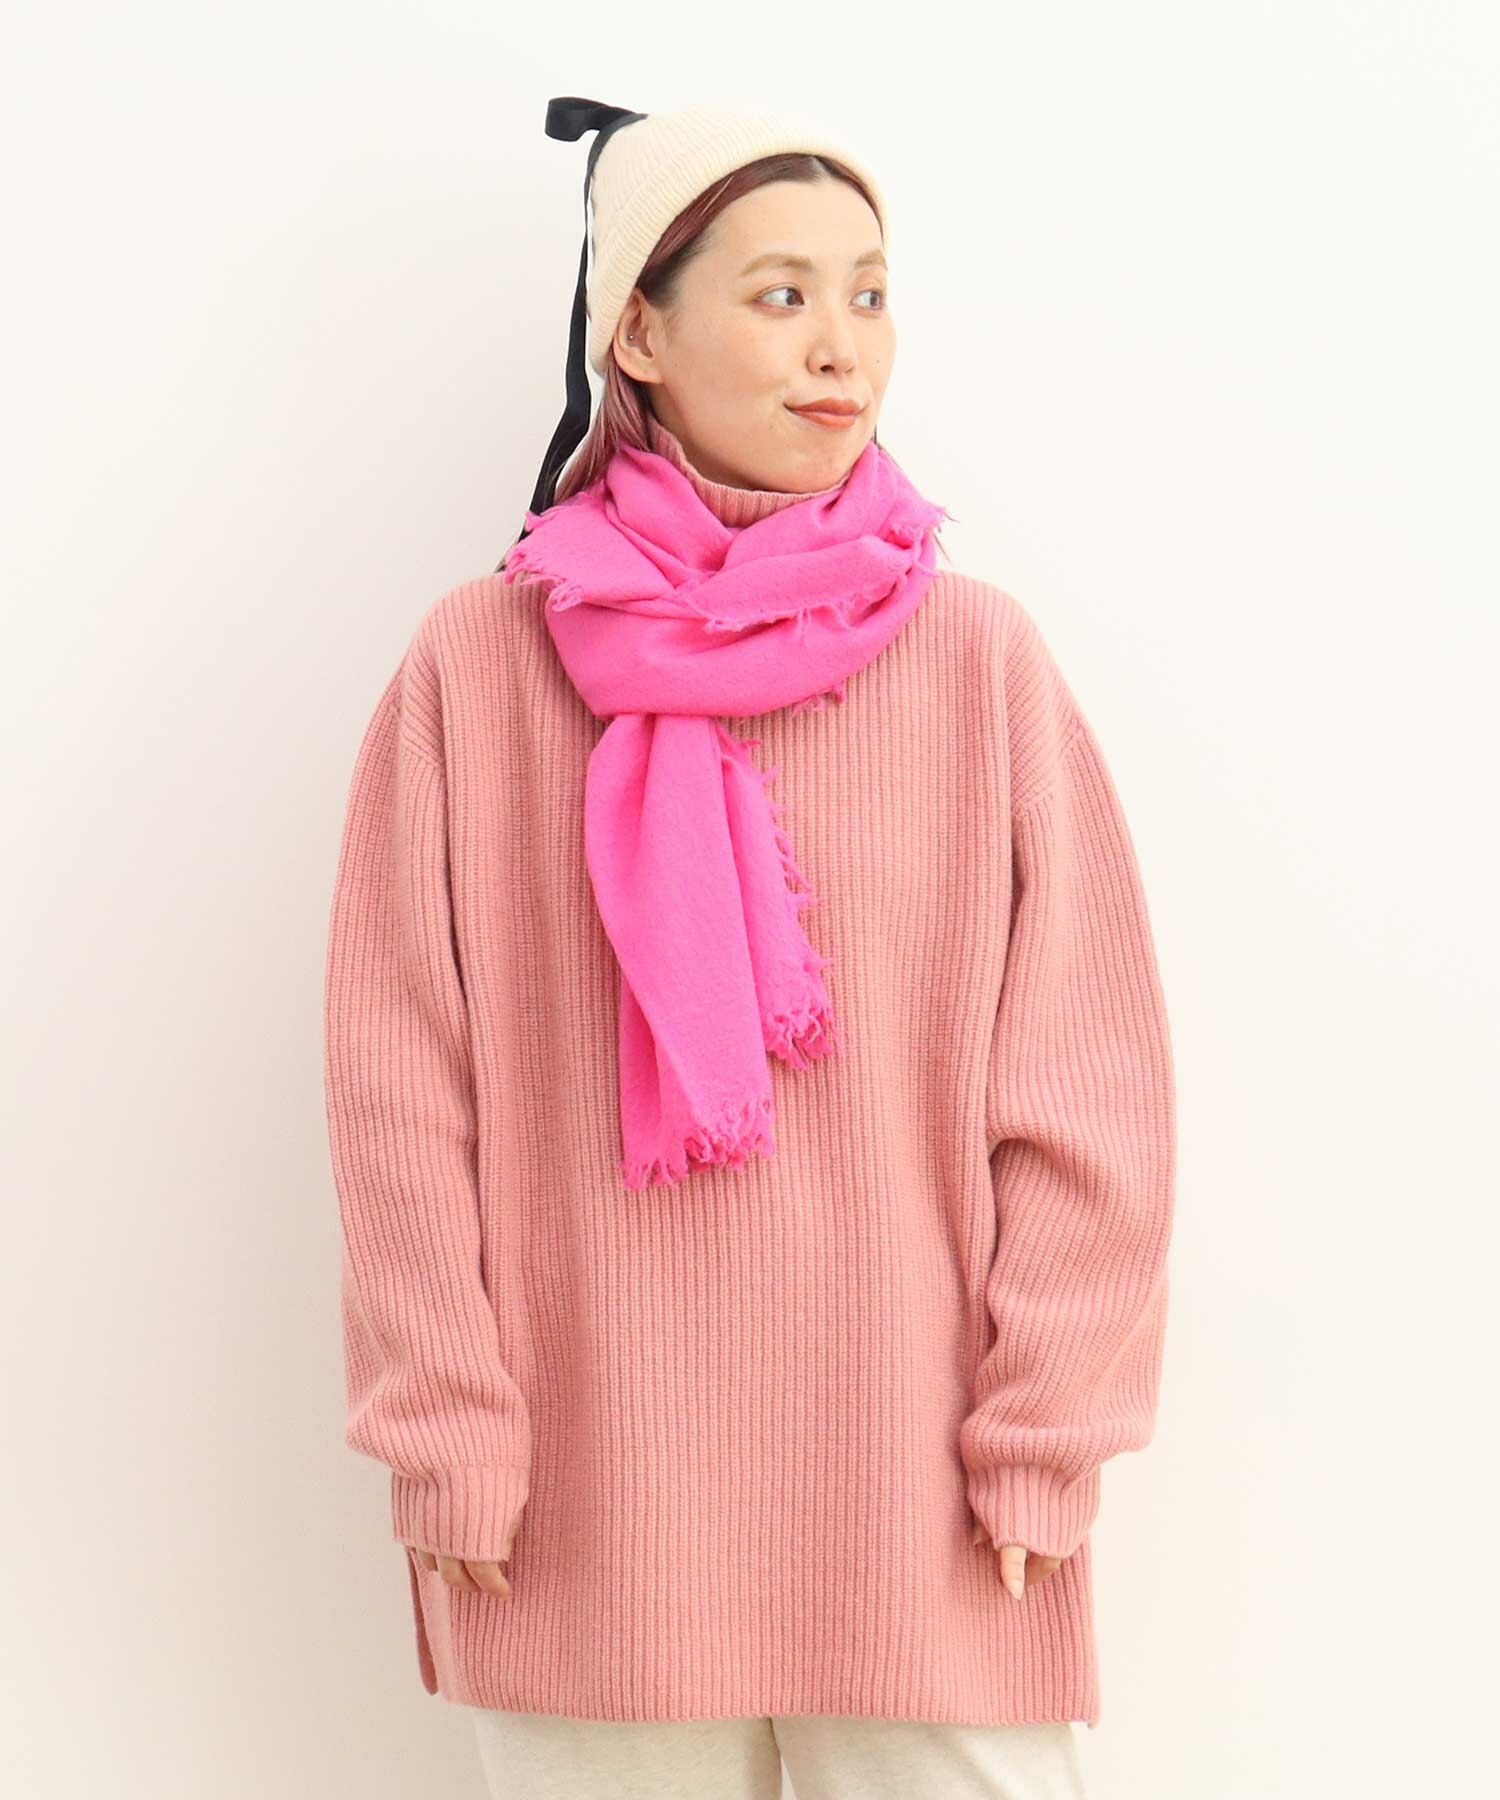 AMBIDEX Store WOOL ストール(F ピンク): Dot and Stripes CHILD WOMAN